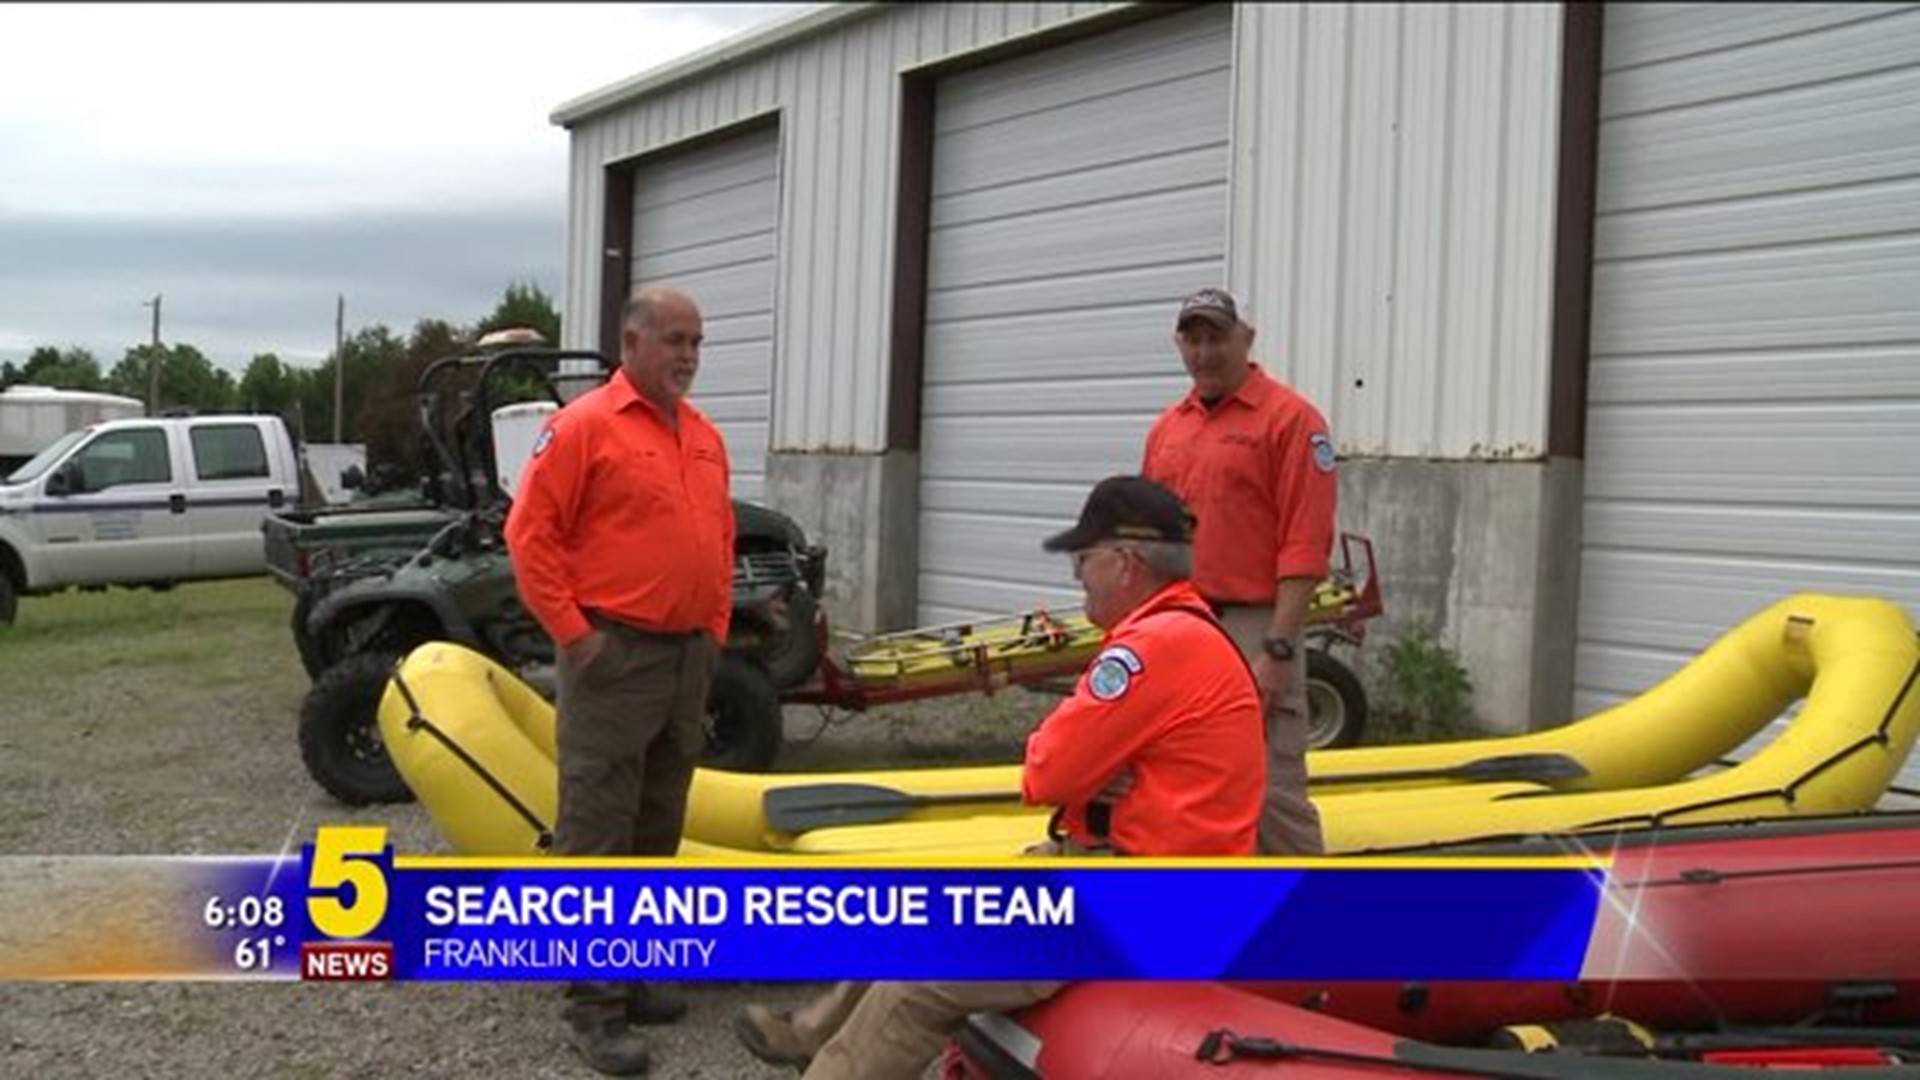 Franklin County Search and Rescue